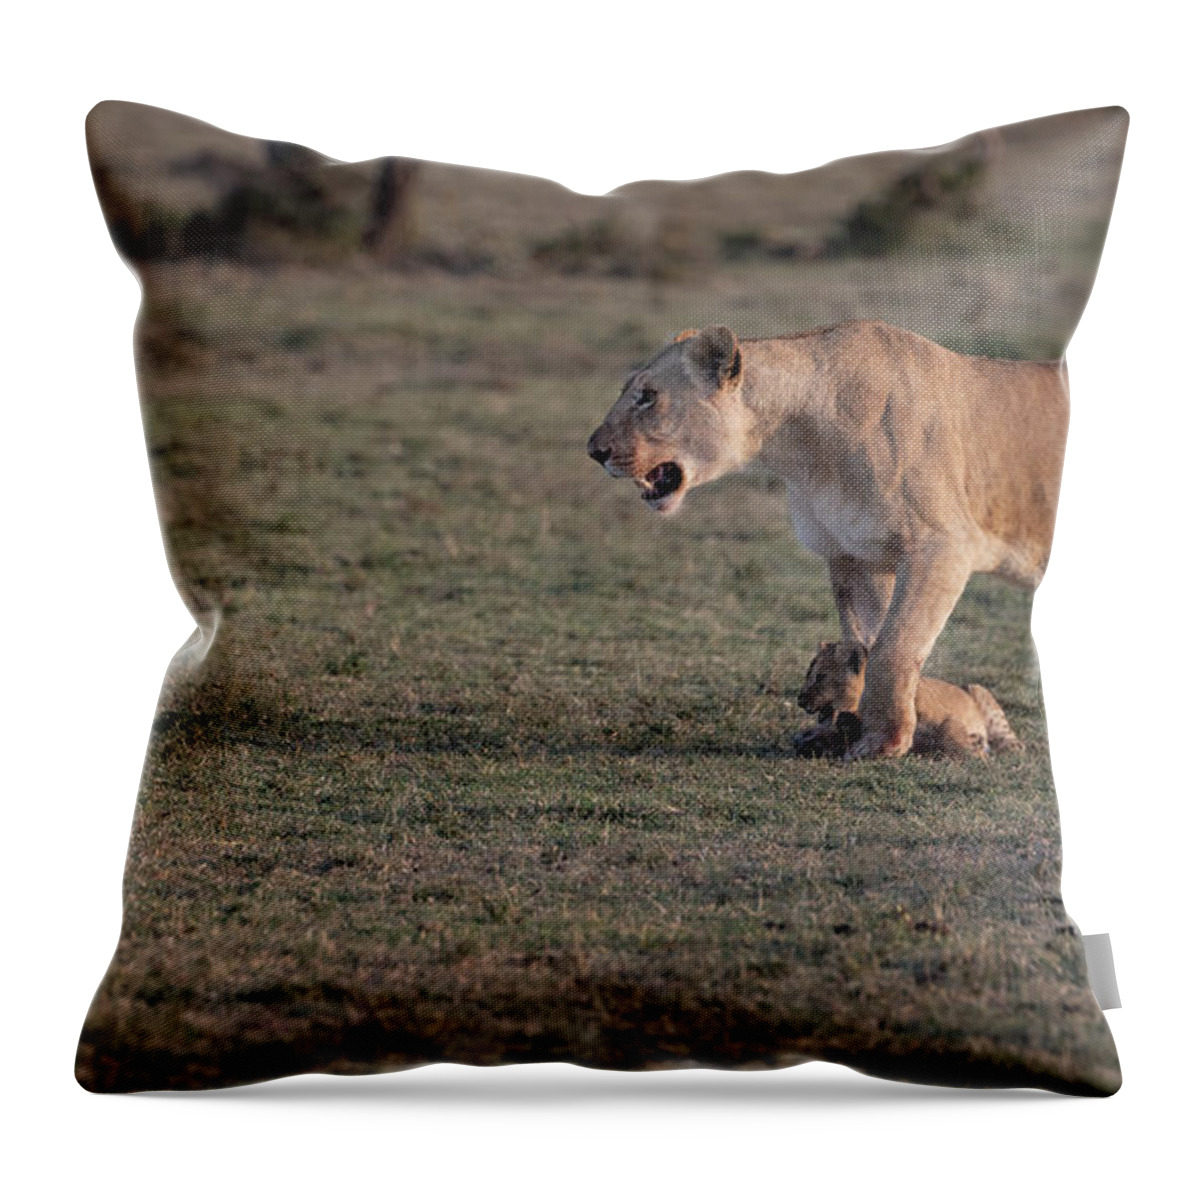 Lions Throw Pillow featuring the photograph Learning The Ropes by Sandra Bronstein